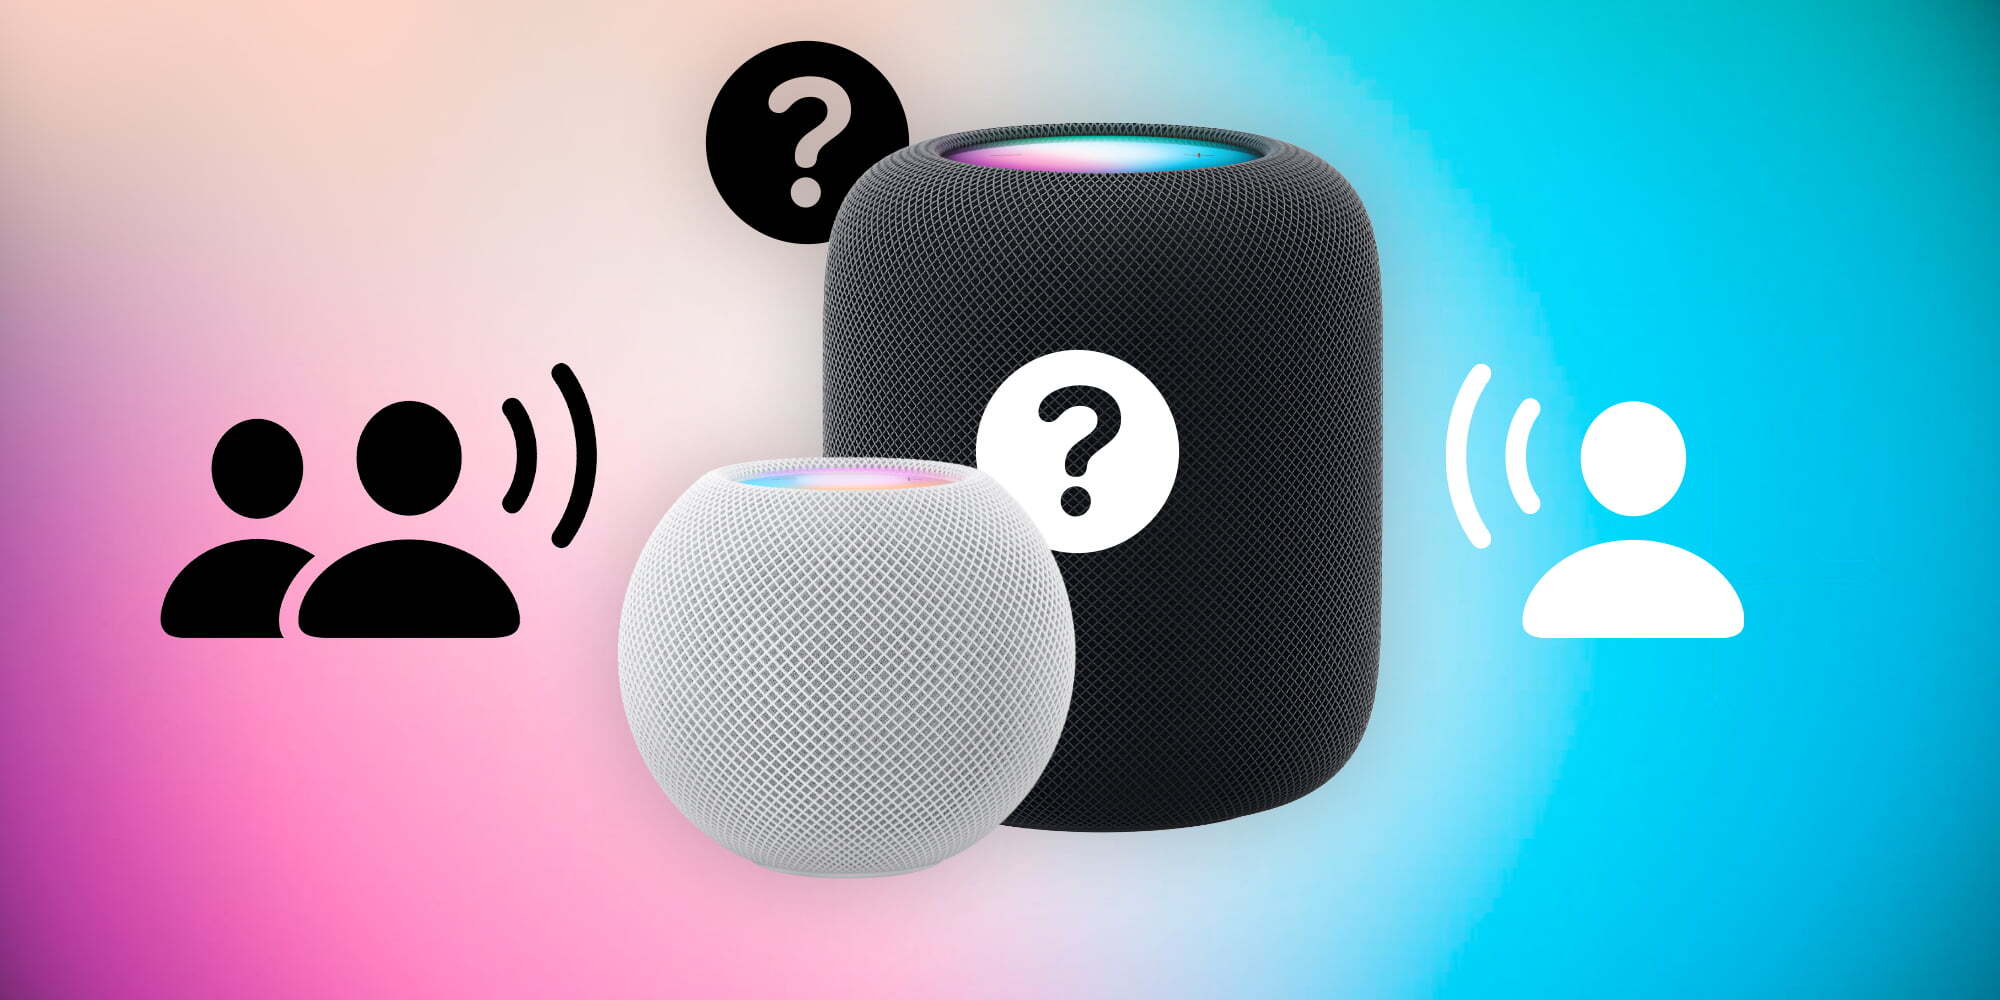 Feature Request: Please send help for HomePod’s ‘I’m not sure who is speaking’ bug